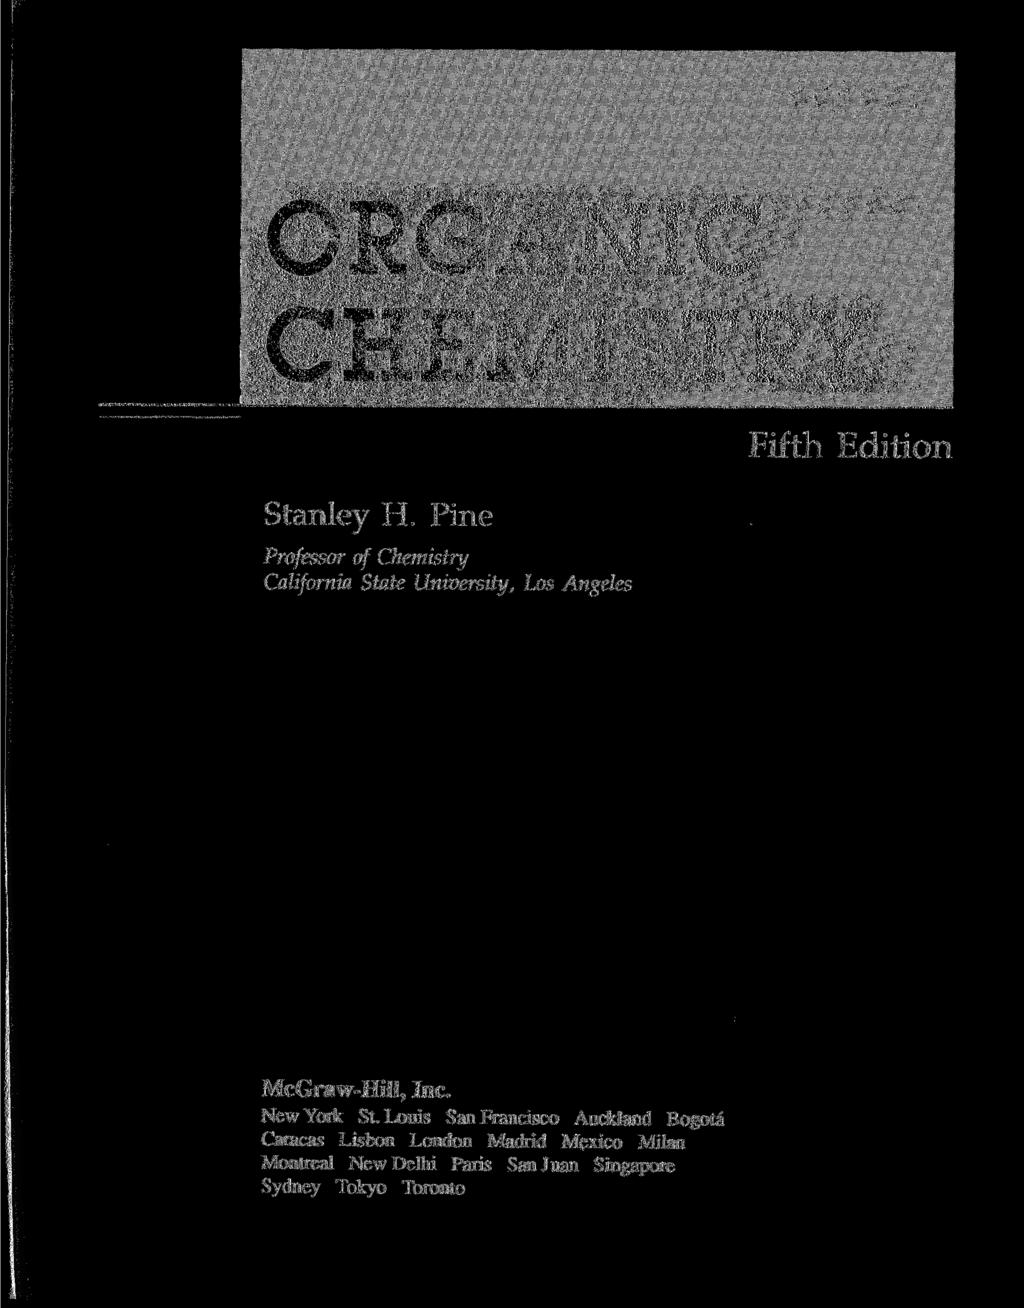 ORGANIC CHEMISTRY Fifth Edition Stanley H. Pine Professor of Chemistry California State University, Los Angeles McGraw-Hill, Inc. New York St.